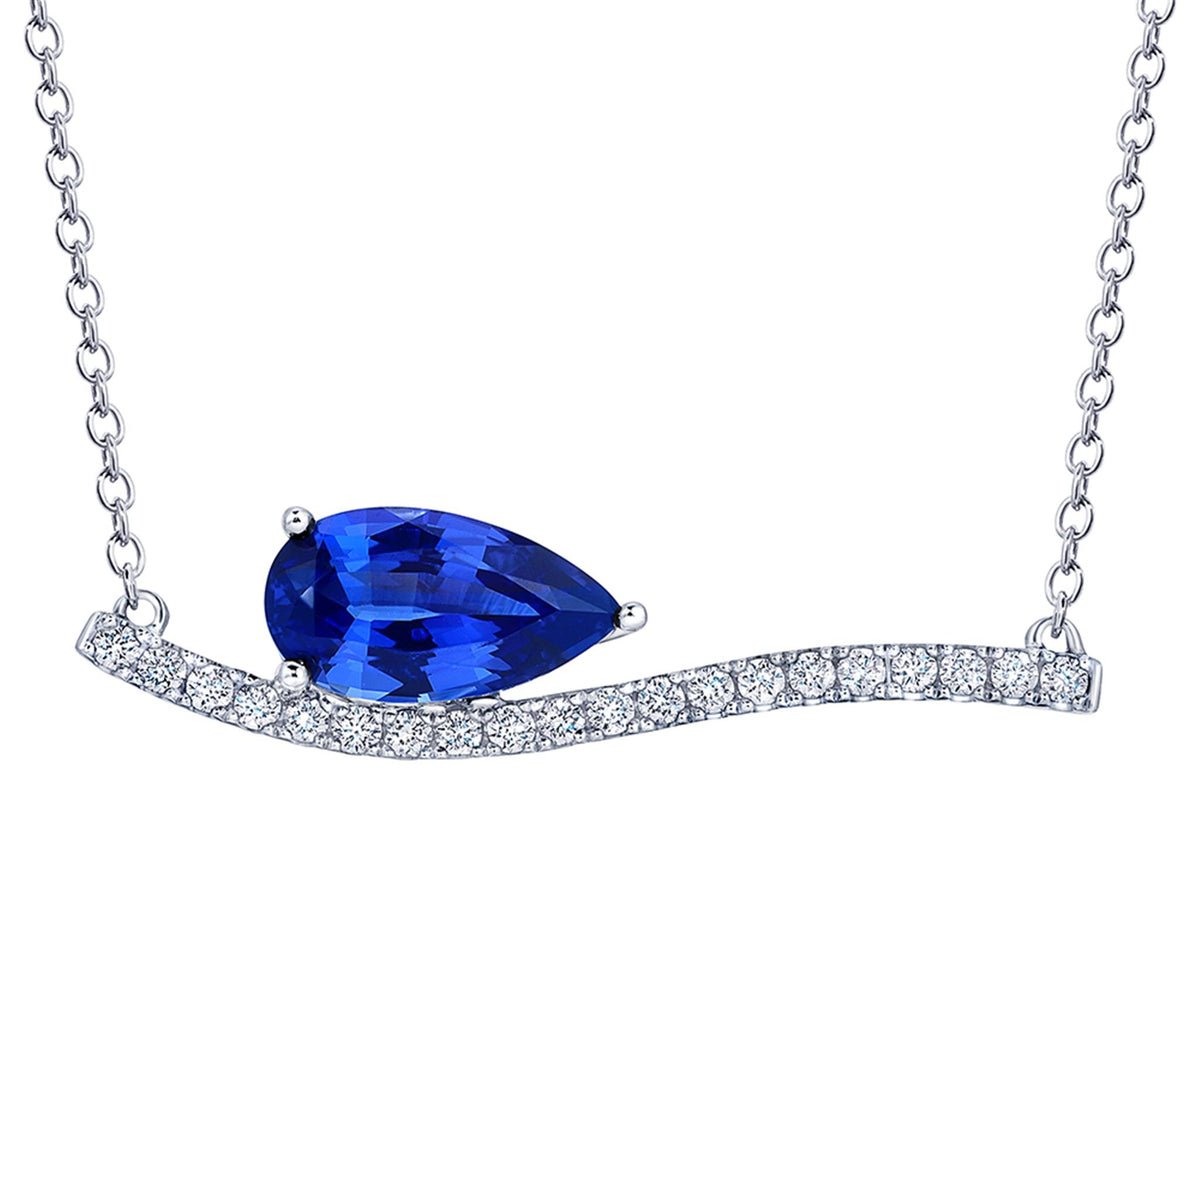 14Kt White Gold Contemporary Pendant With 1.61ct Chatham Lab Created Blue Sapphire